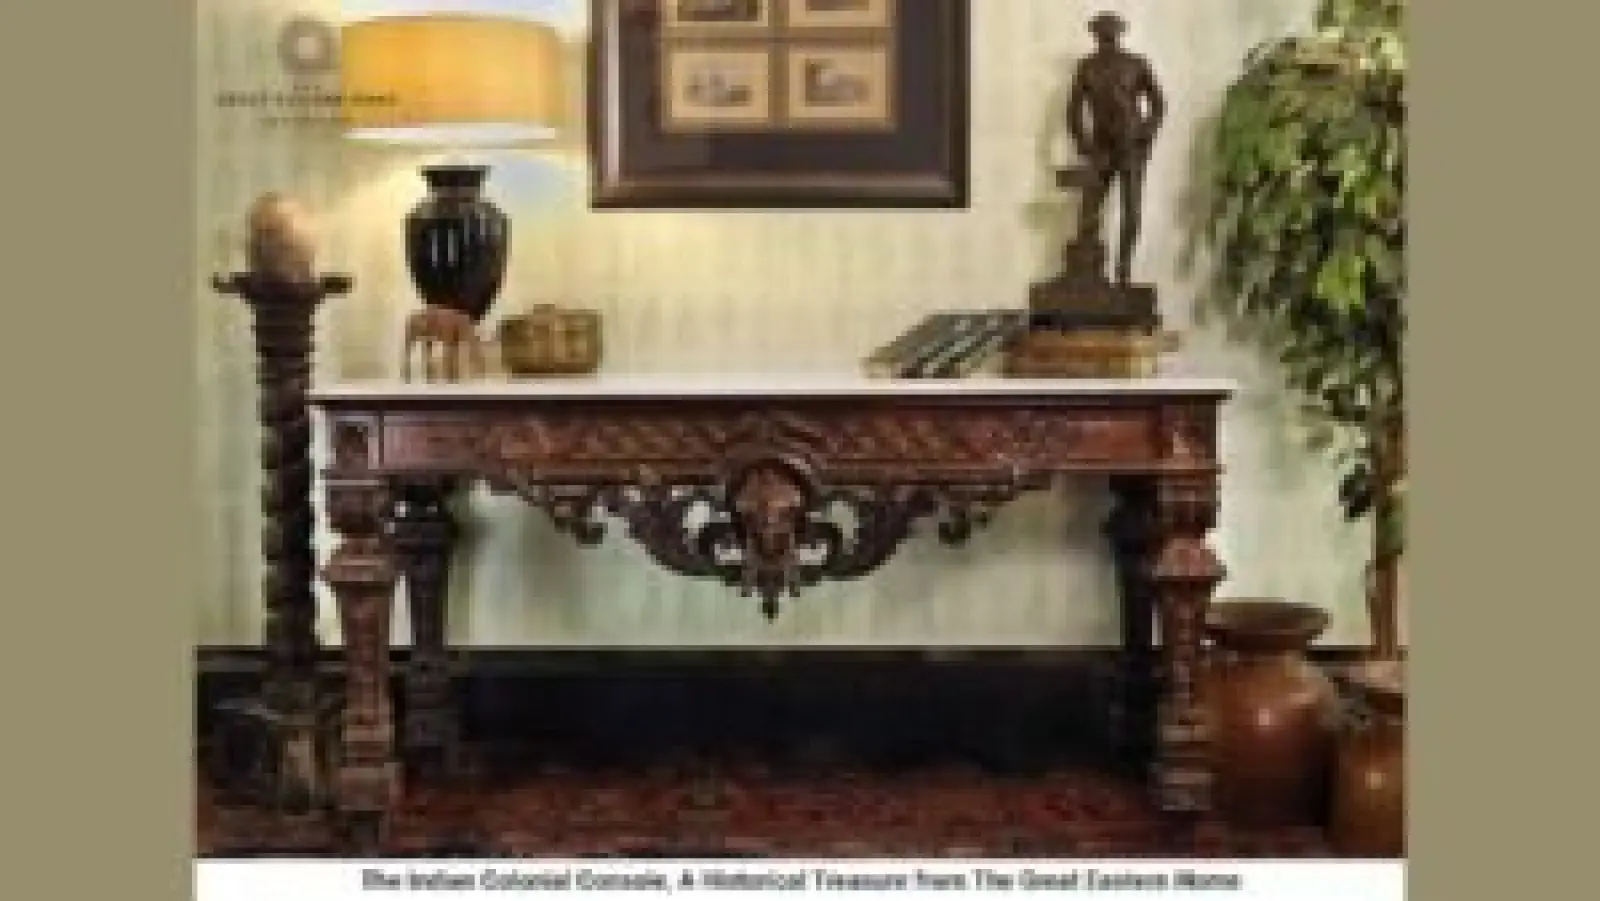 The Indian Colonial Console, A Historical Treasure from The Great Eastern Home